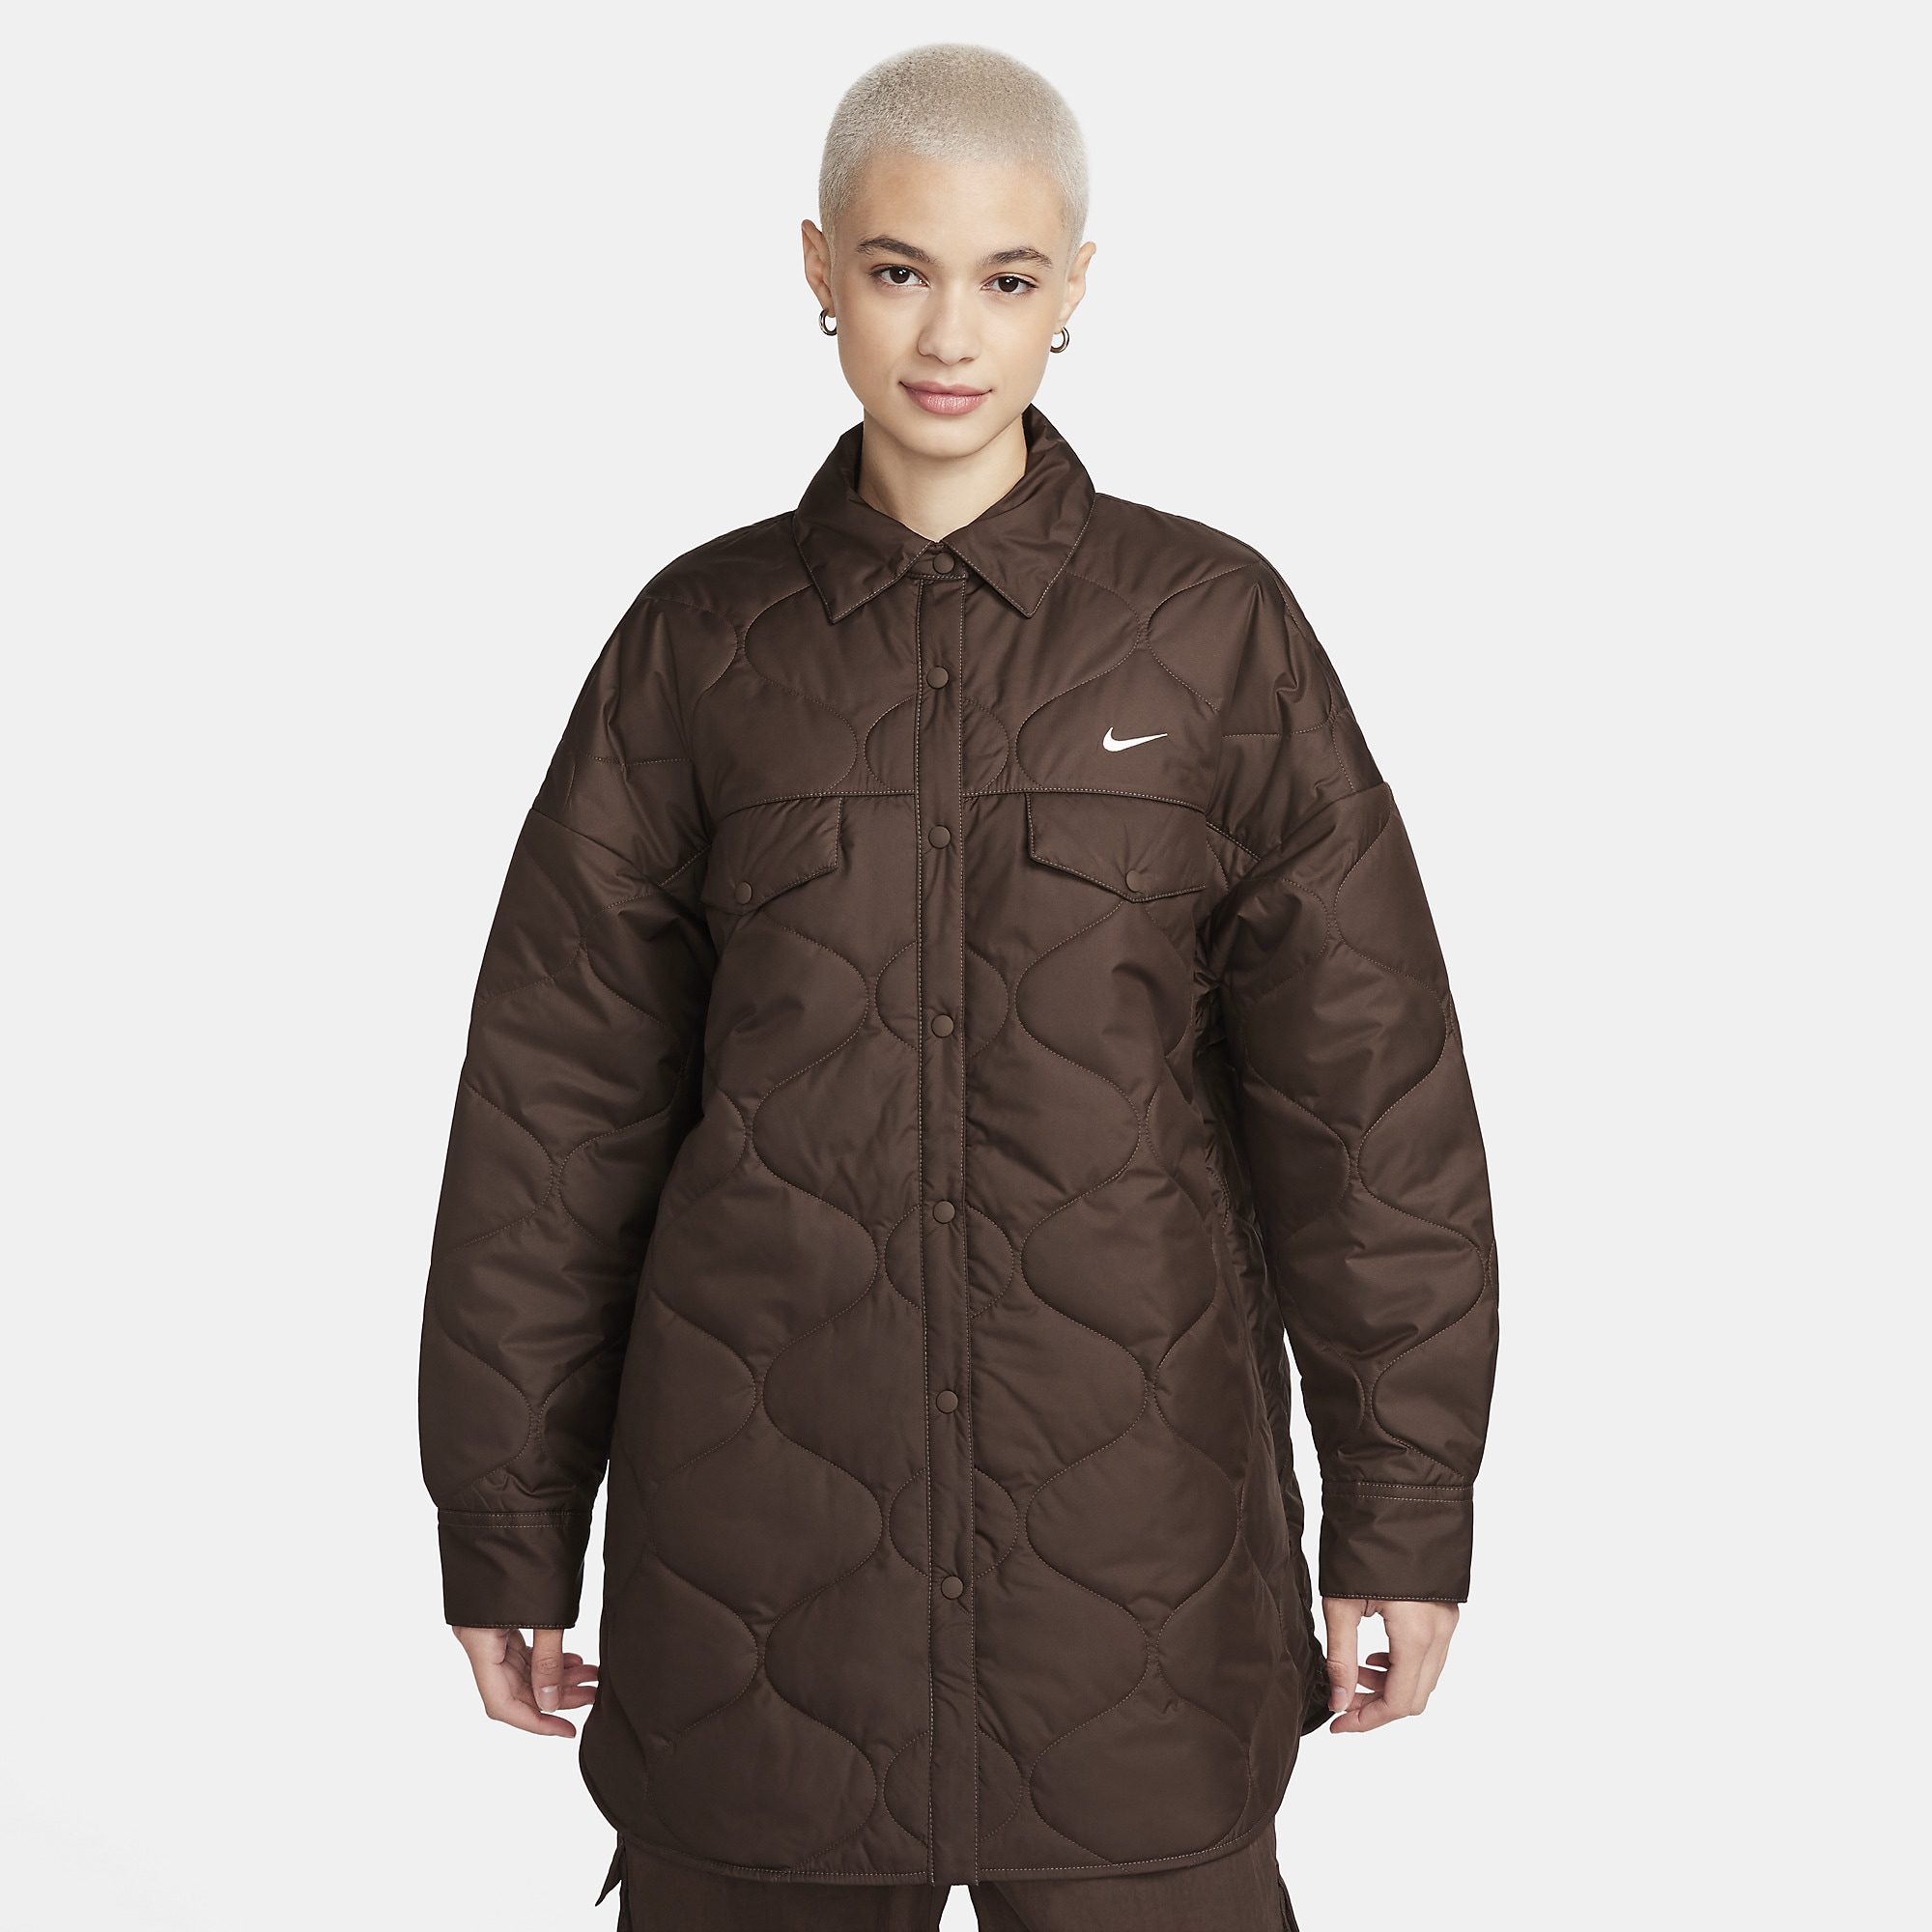 Nike Sportswear Womens Essential Quilted Trench Jacket | Pro:Direct Soccer